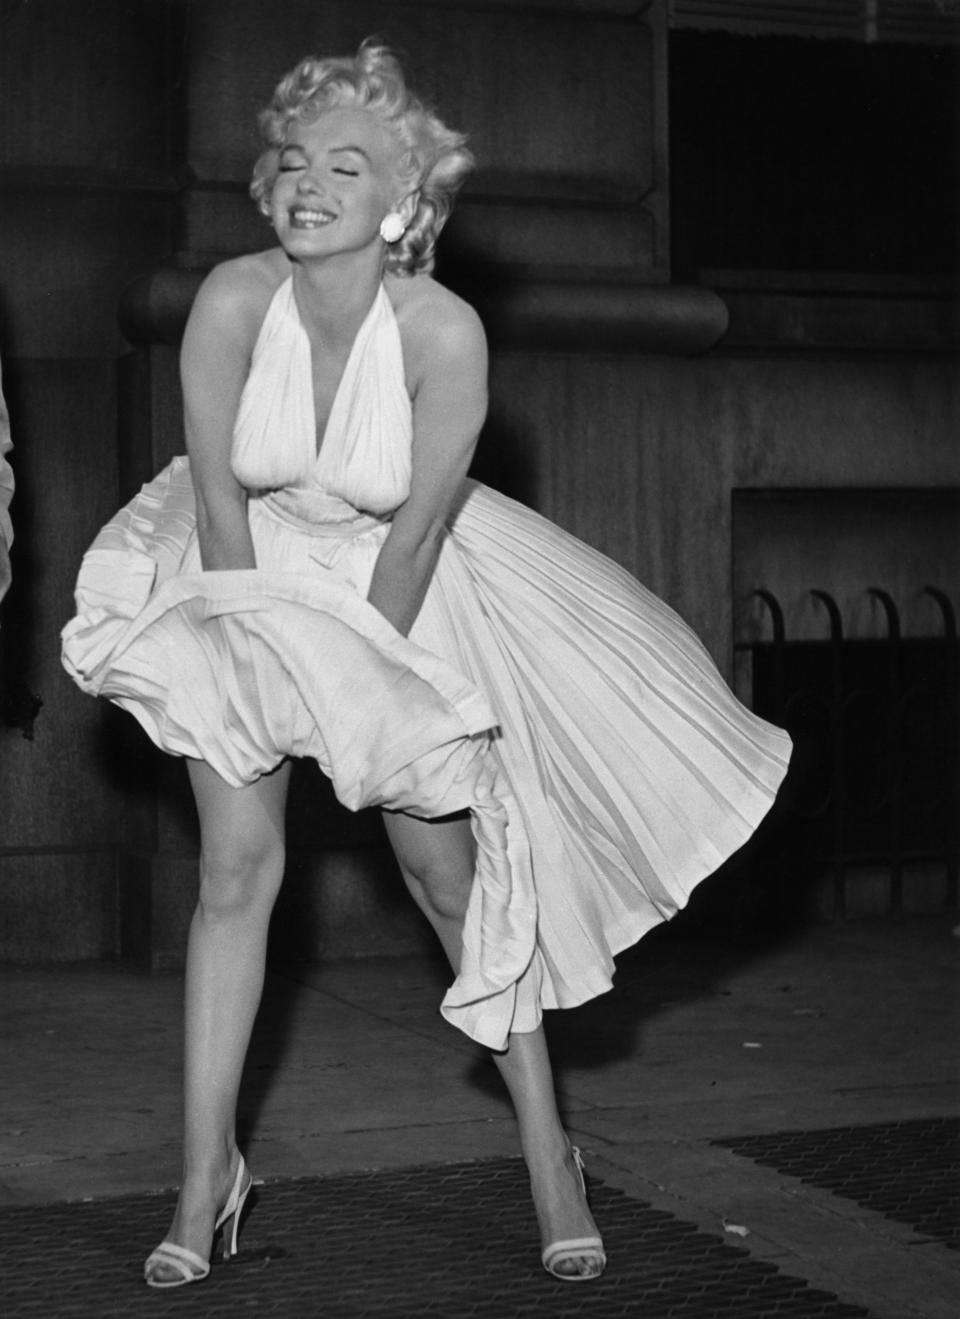 Bruno Bernard's photo of  Marilyn Monroe from "The Seven Year Itch."